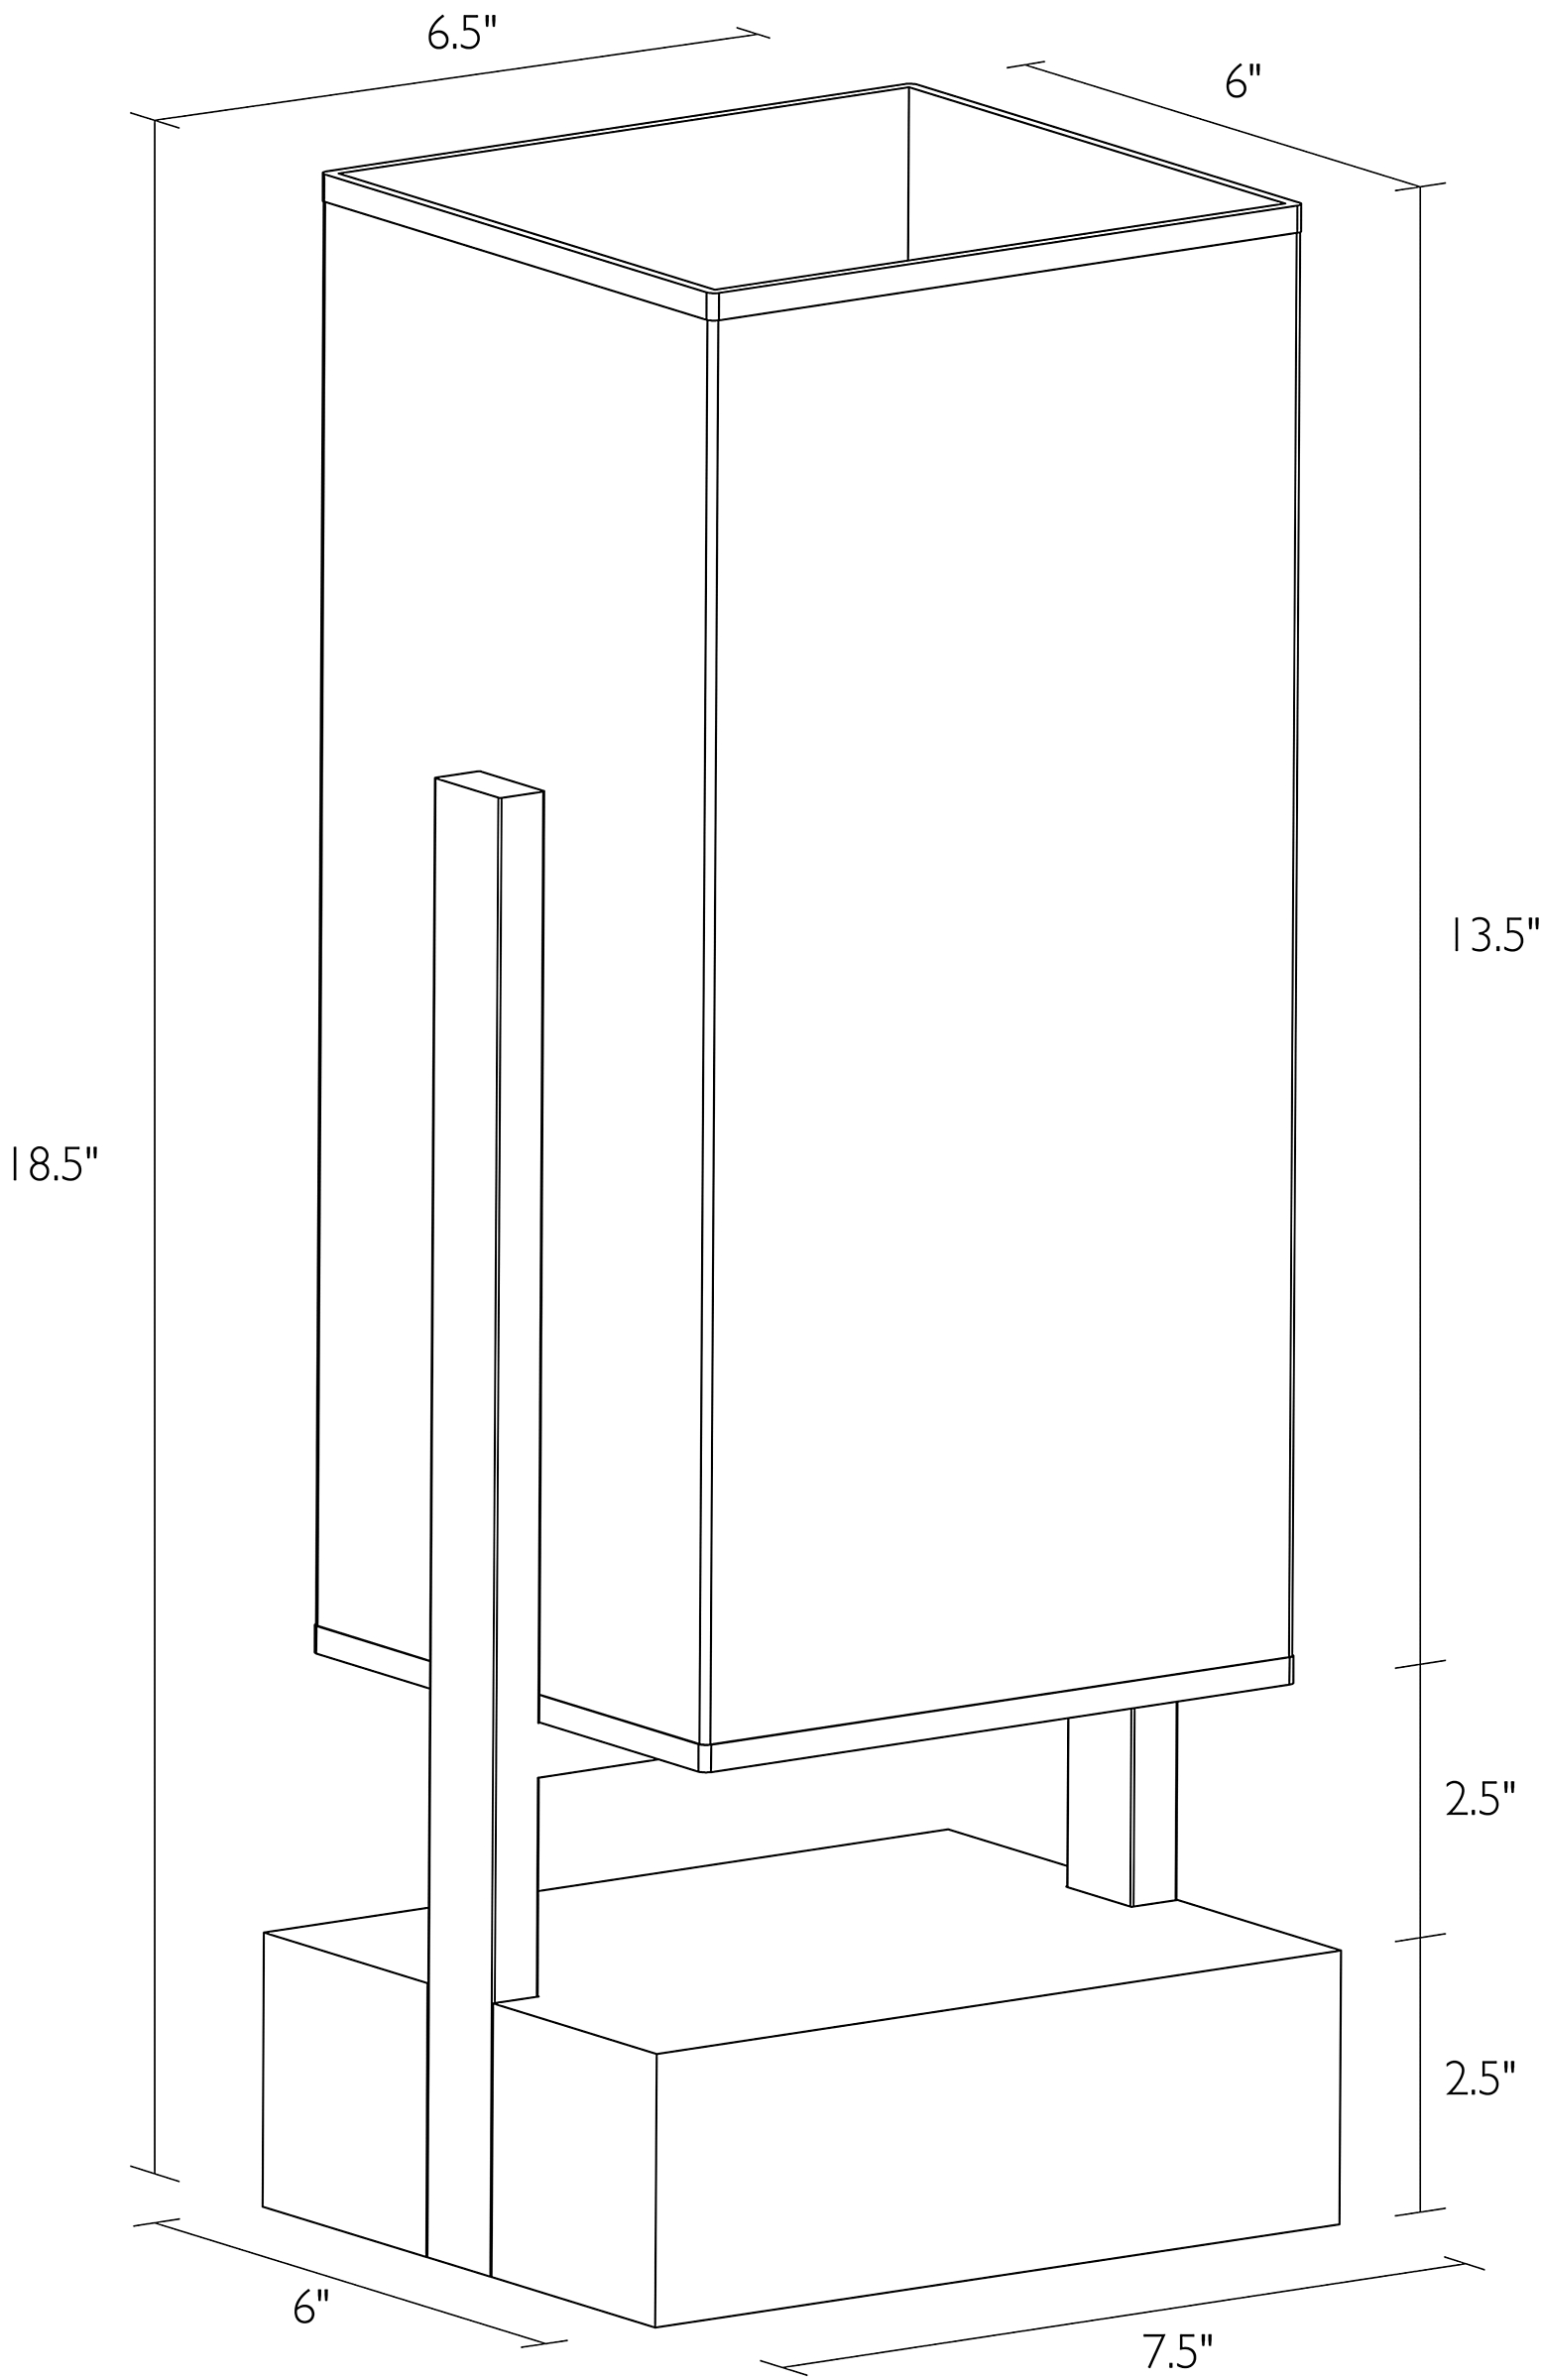 Line drawing of Adwell lamp.